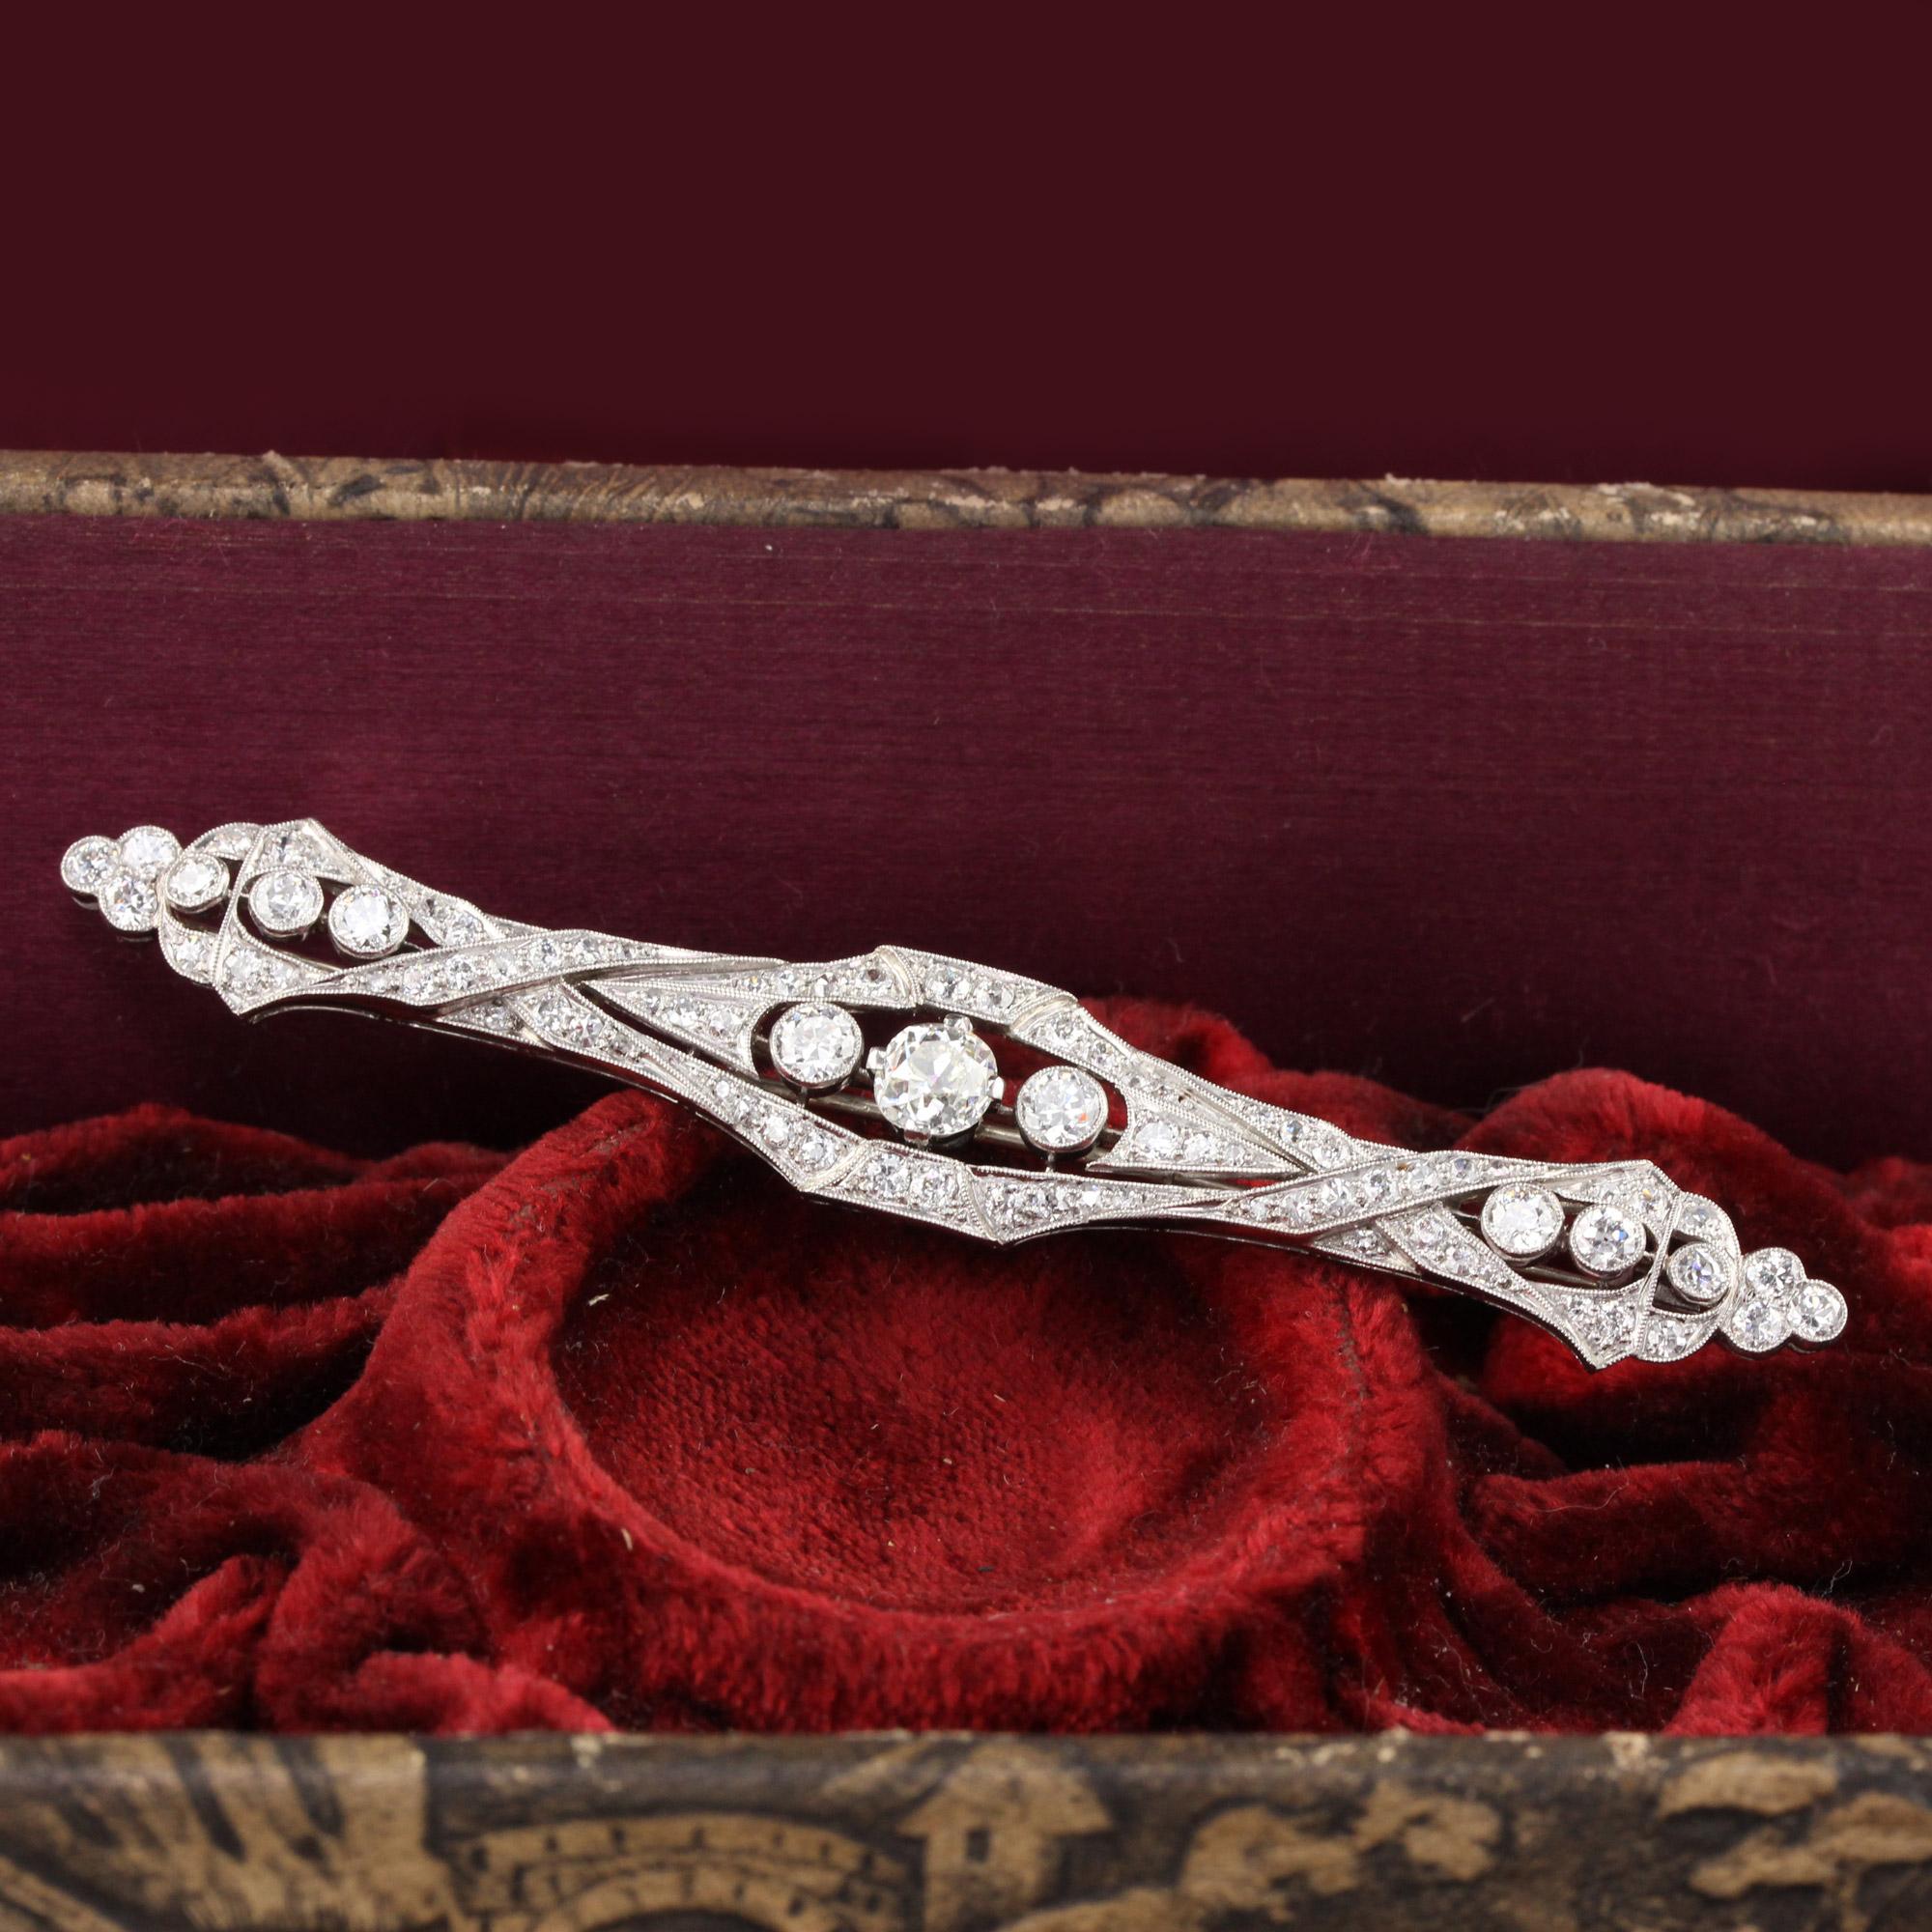 Magnificent Edwardian platinum & old cut diamond bar brooch. This is an incredible brooch unlike any other.

Metal: Platinum

Weight: 17.5 Grams

Diamond Weight: Approximately 4 cts

Diamond Color: H - I

Diamond Clarity: VS2

Measurements: 19 x 93